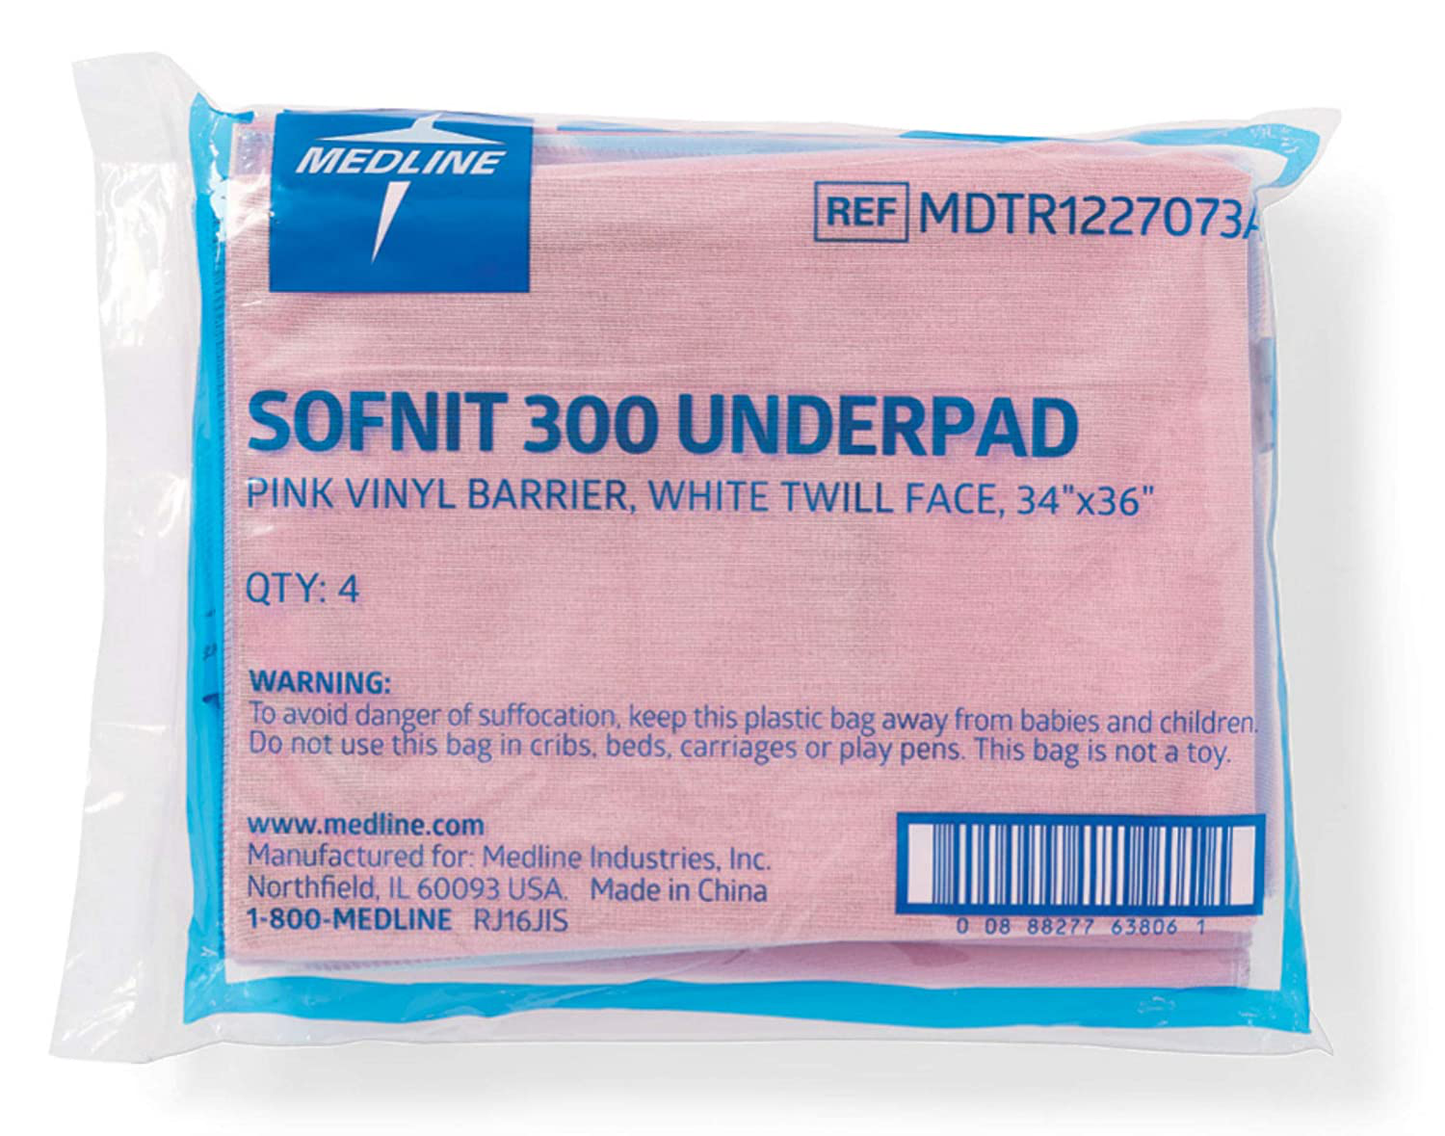 Medline Softnit 300 Washable Underpads, Pack of 4 Large Bed Pads, 34" X 36", for Use as Incontinence Bed Pads, Reusable Pet Pads, Great for Dogs, Cats, and Bunny